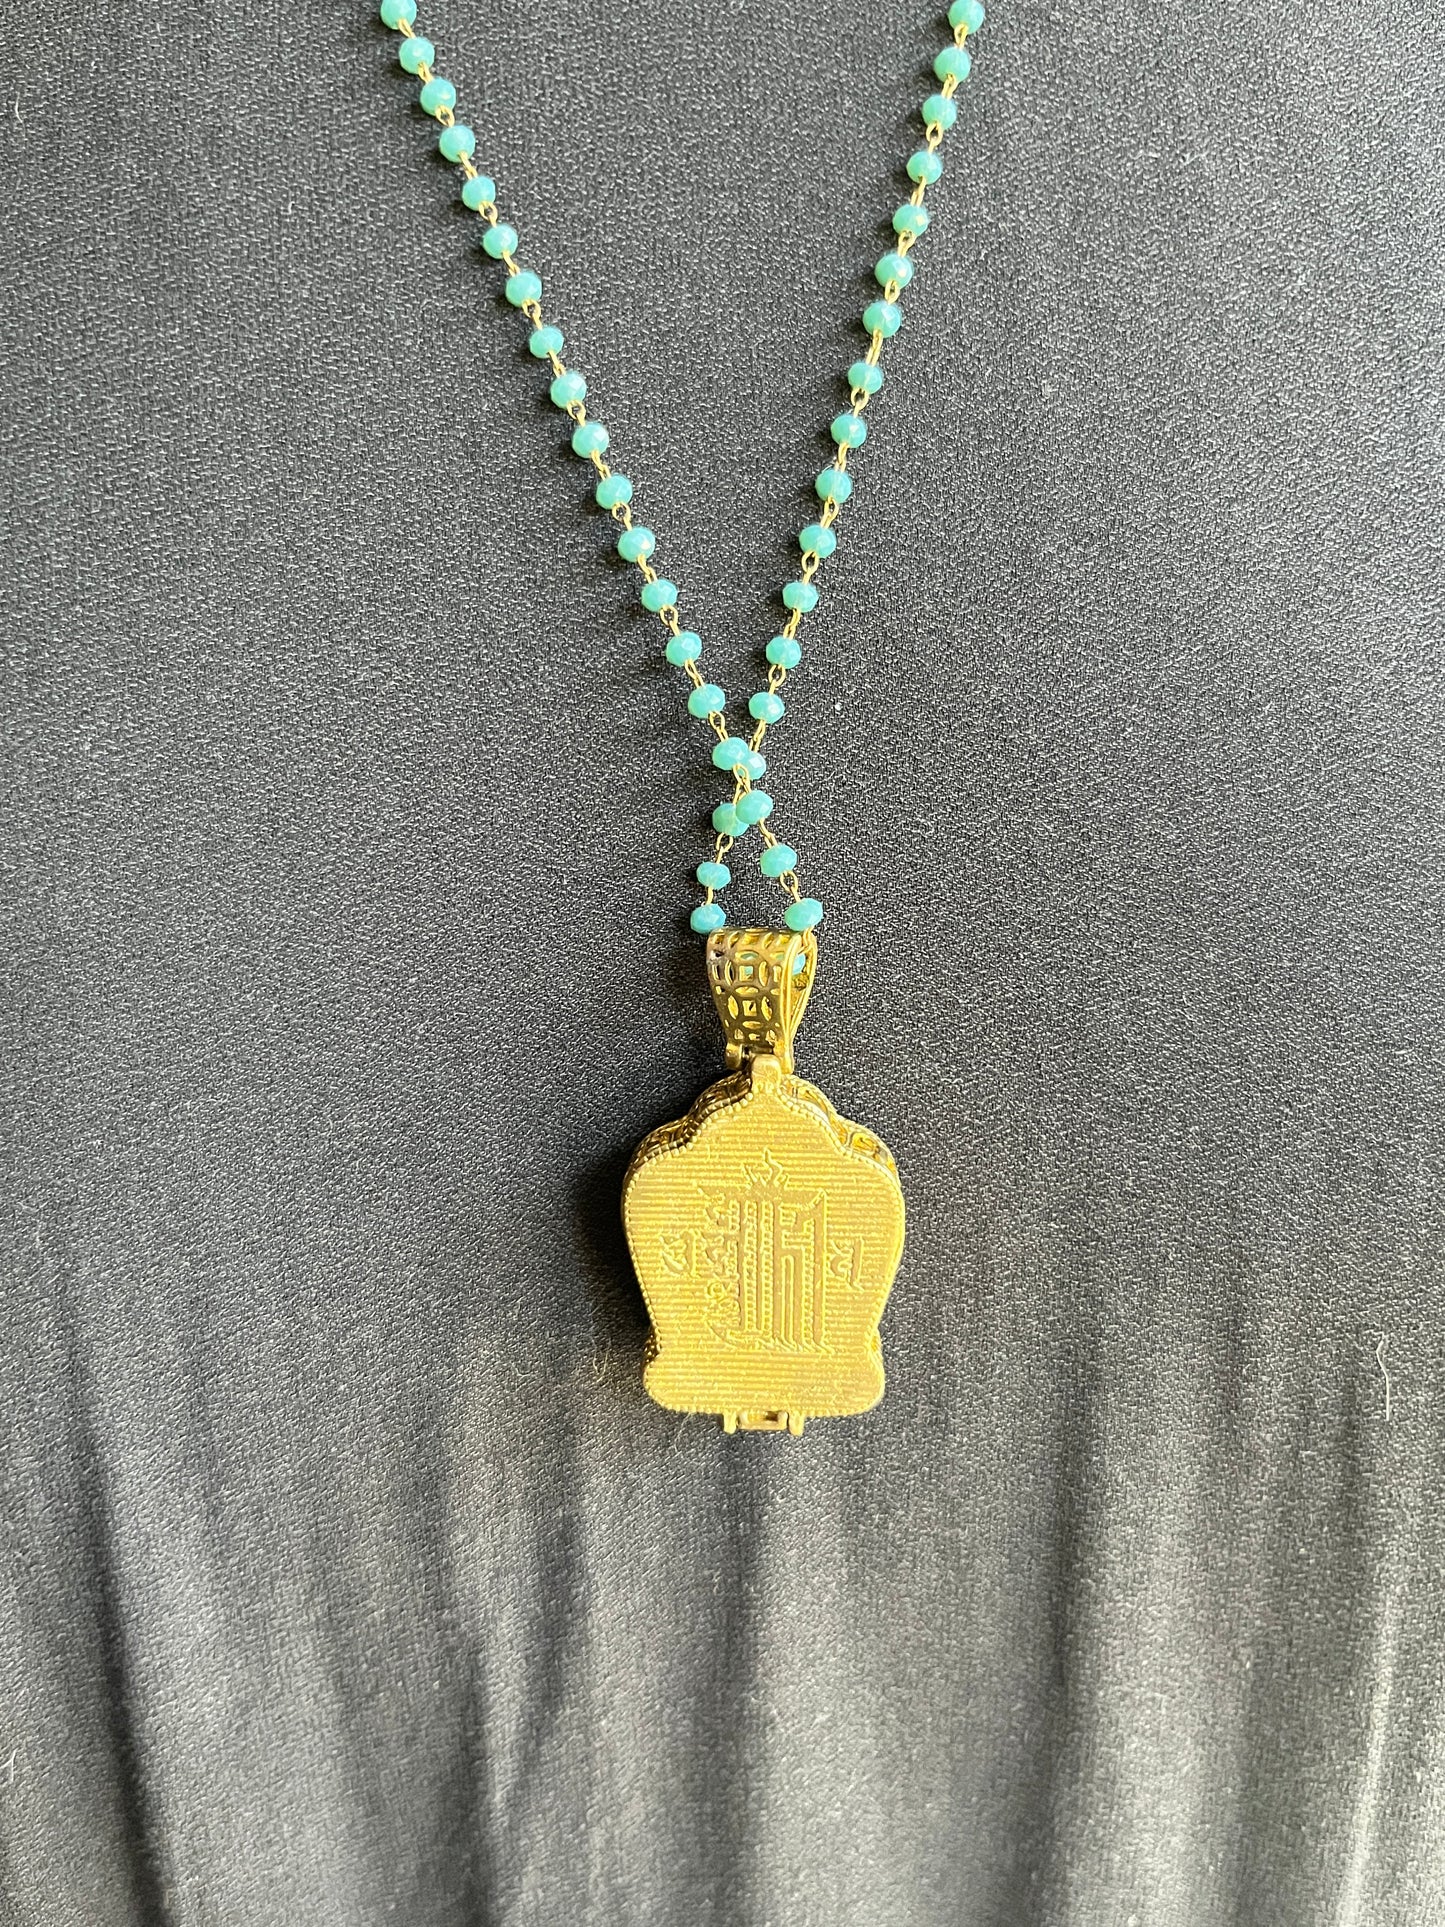 *Sale Price* Solid Brass Tibetan Locket Pendant Necklace on Crystal Glass Rosary Chain - Blue Jean Green ~ Choose Your Gemstone